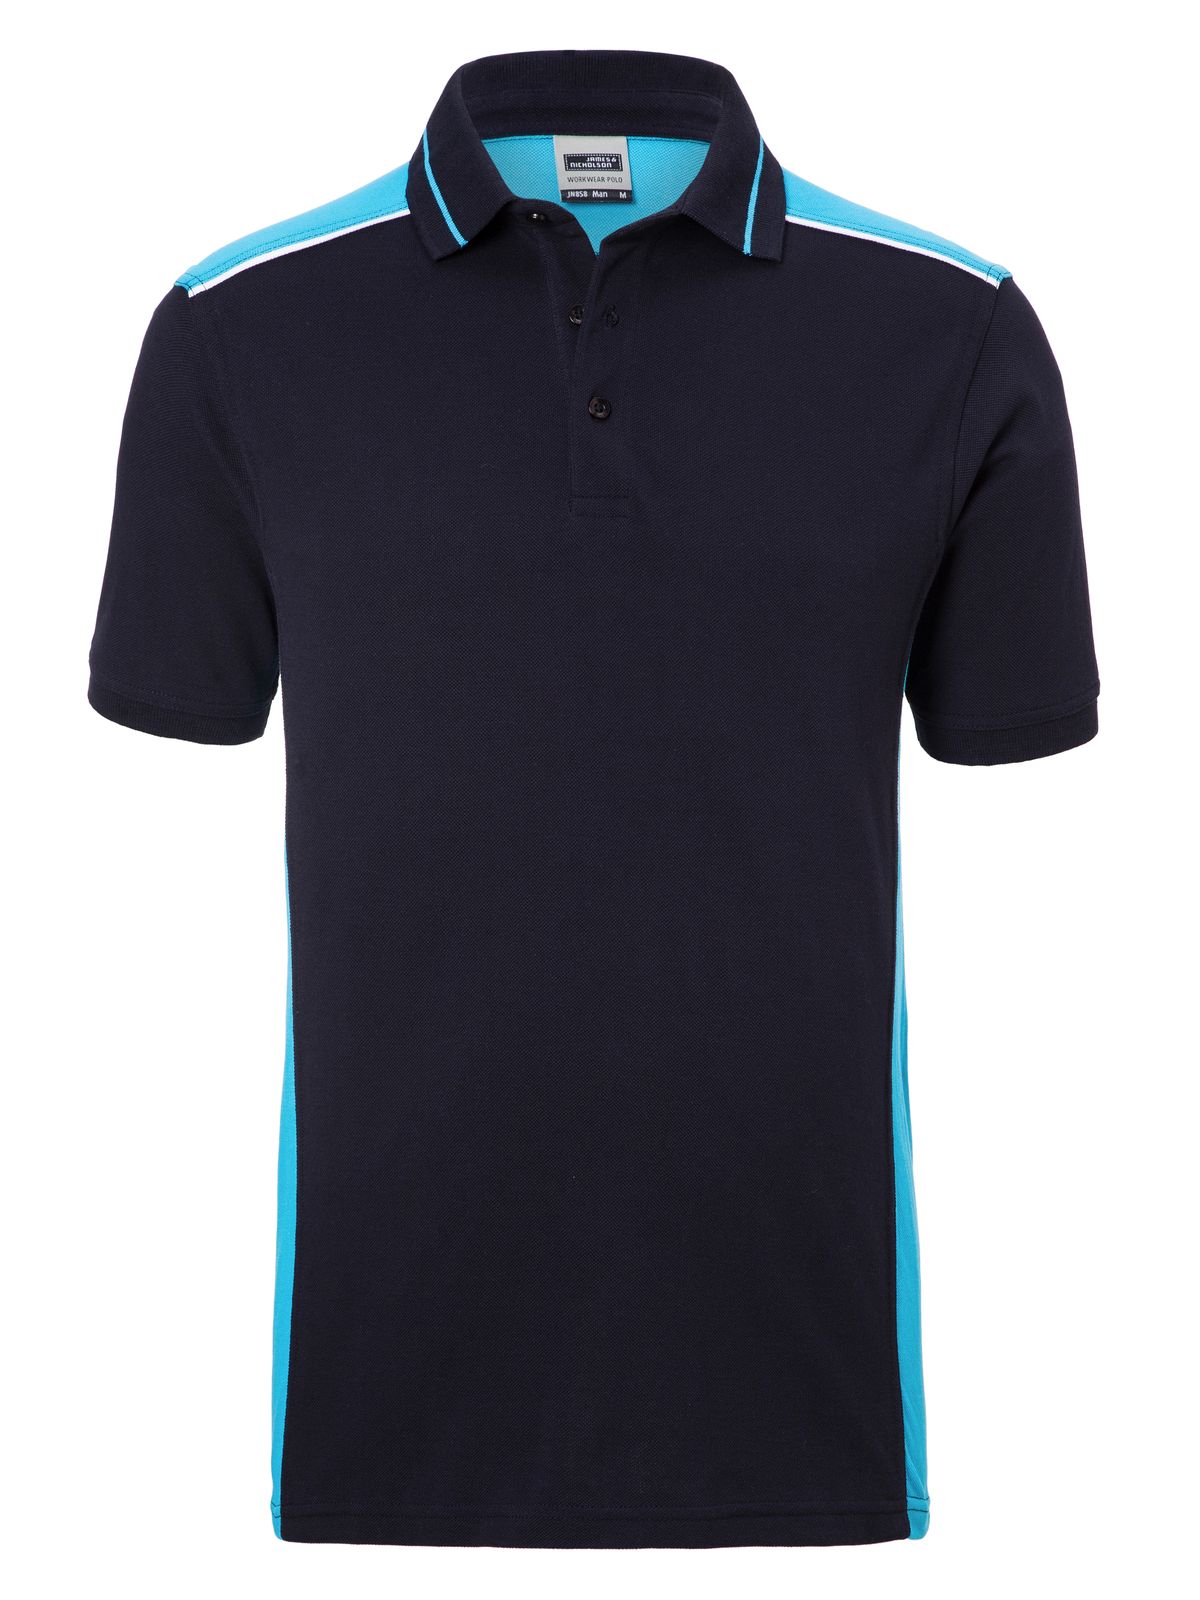 mens-workwear-polo-color-navy-tourquoise.webp